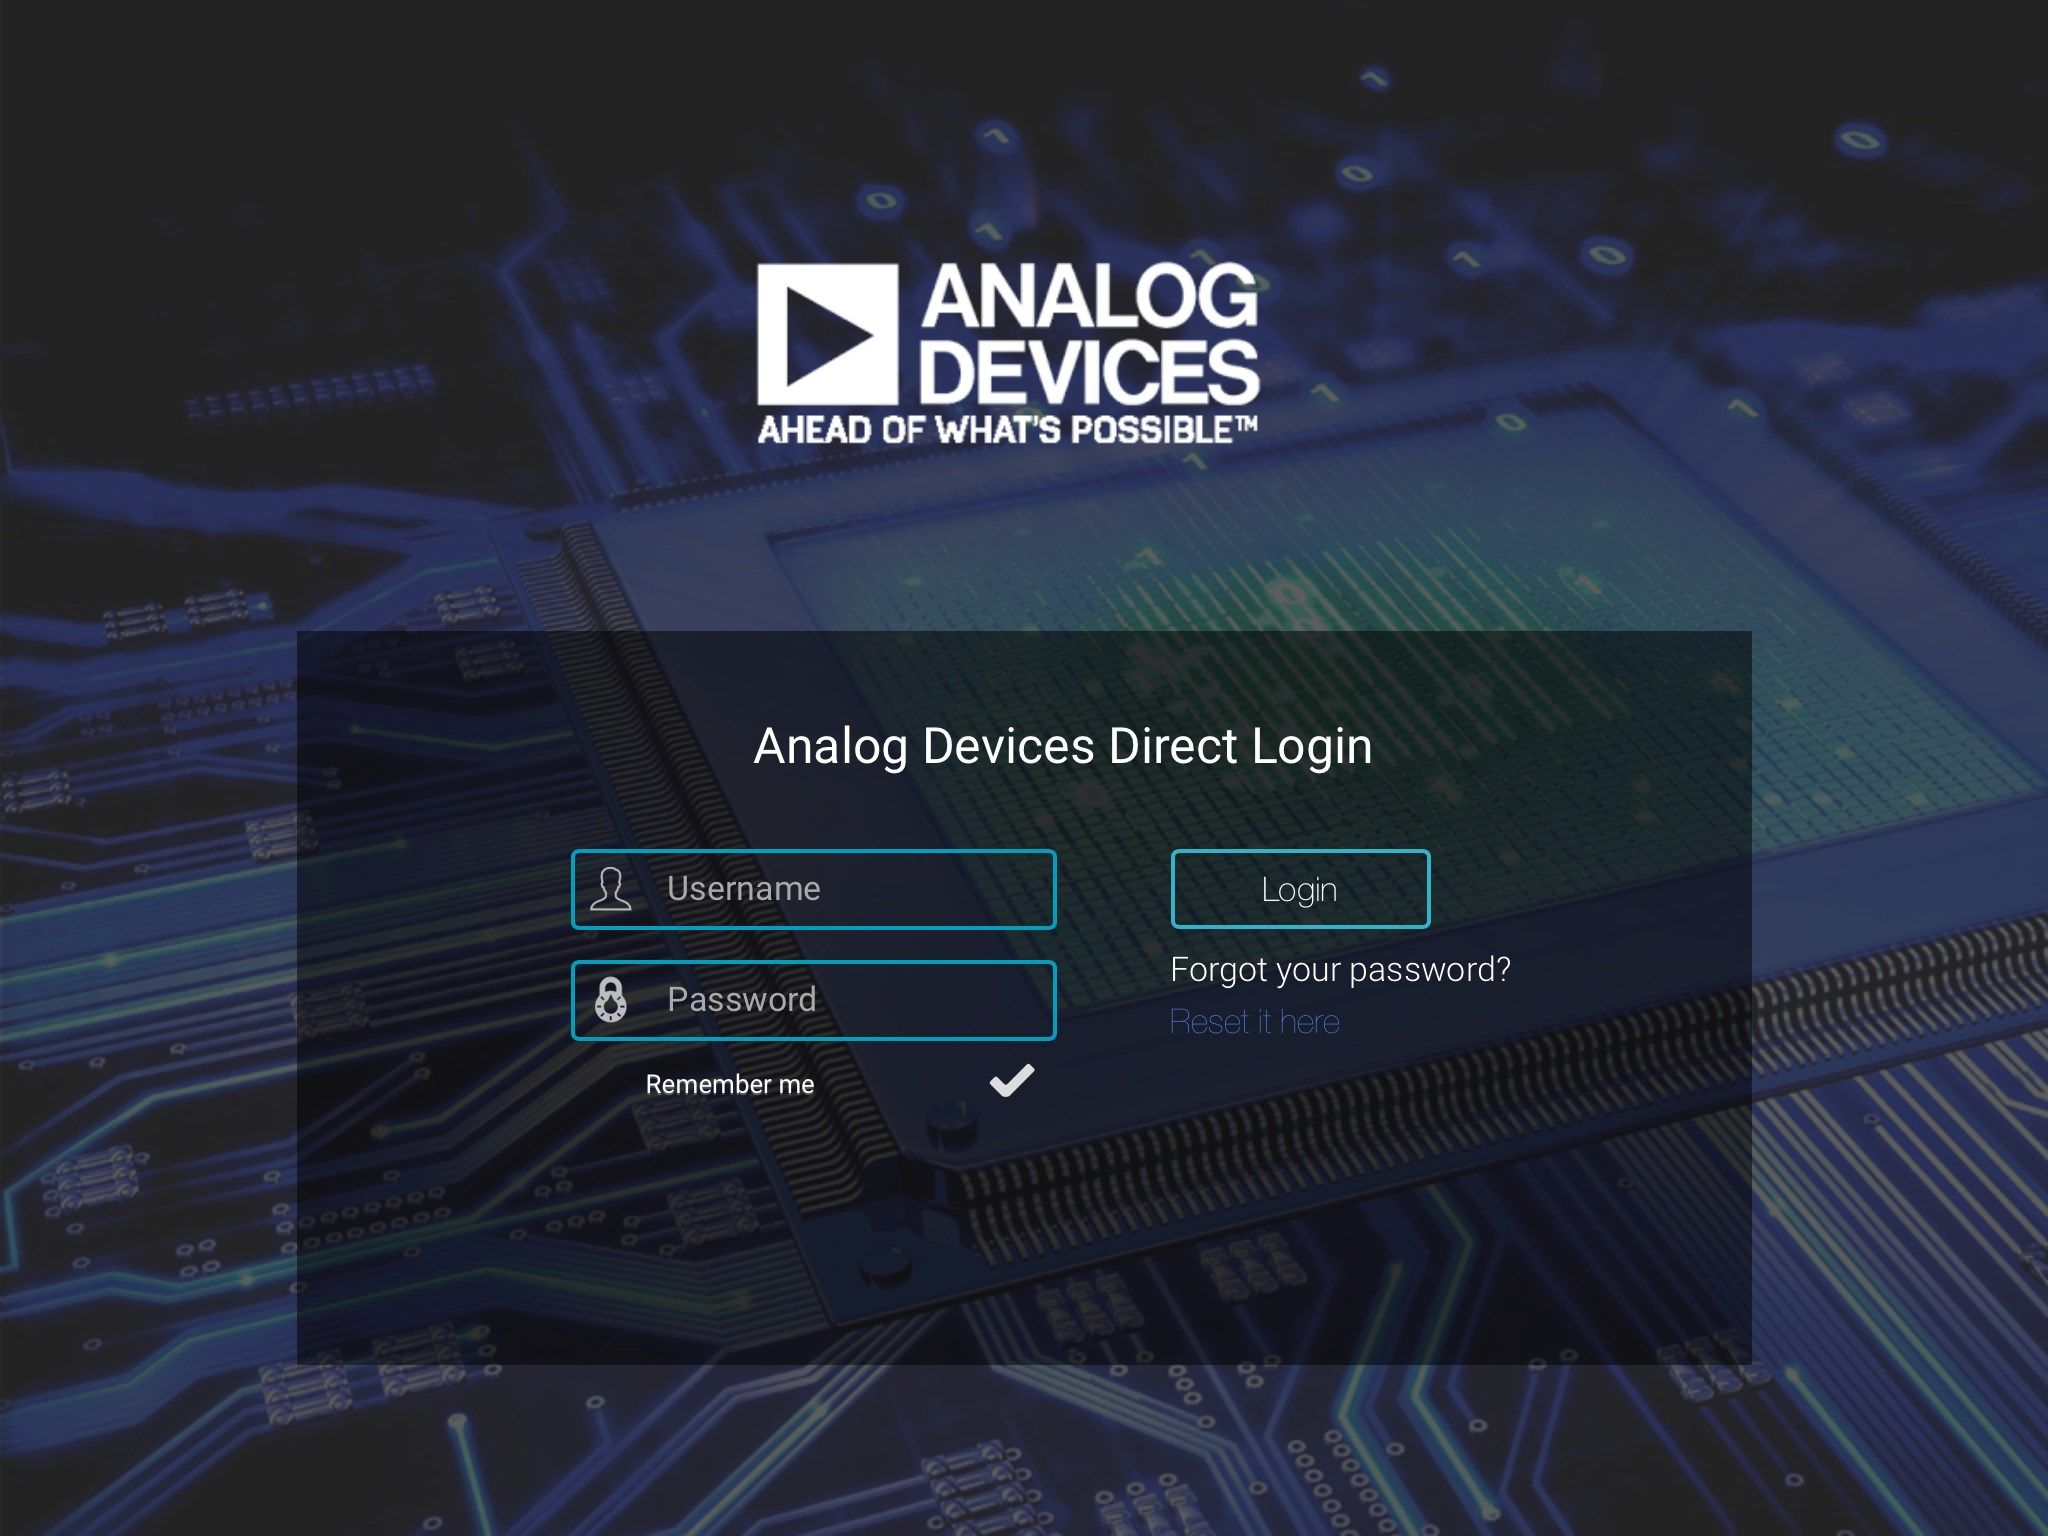 Analog Devices Mobile Learning